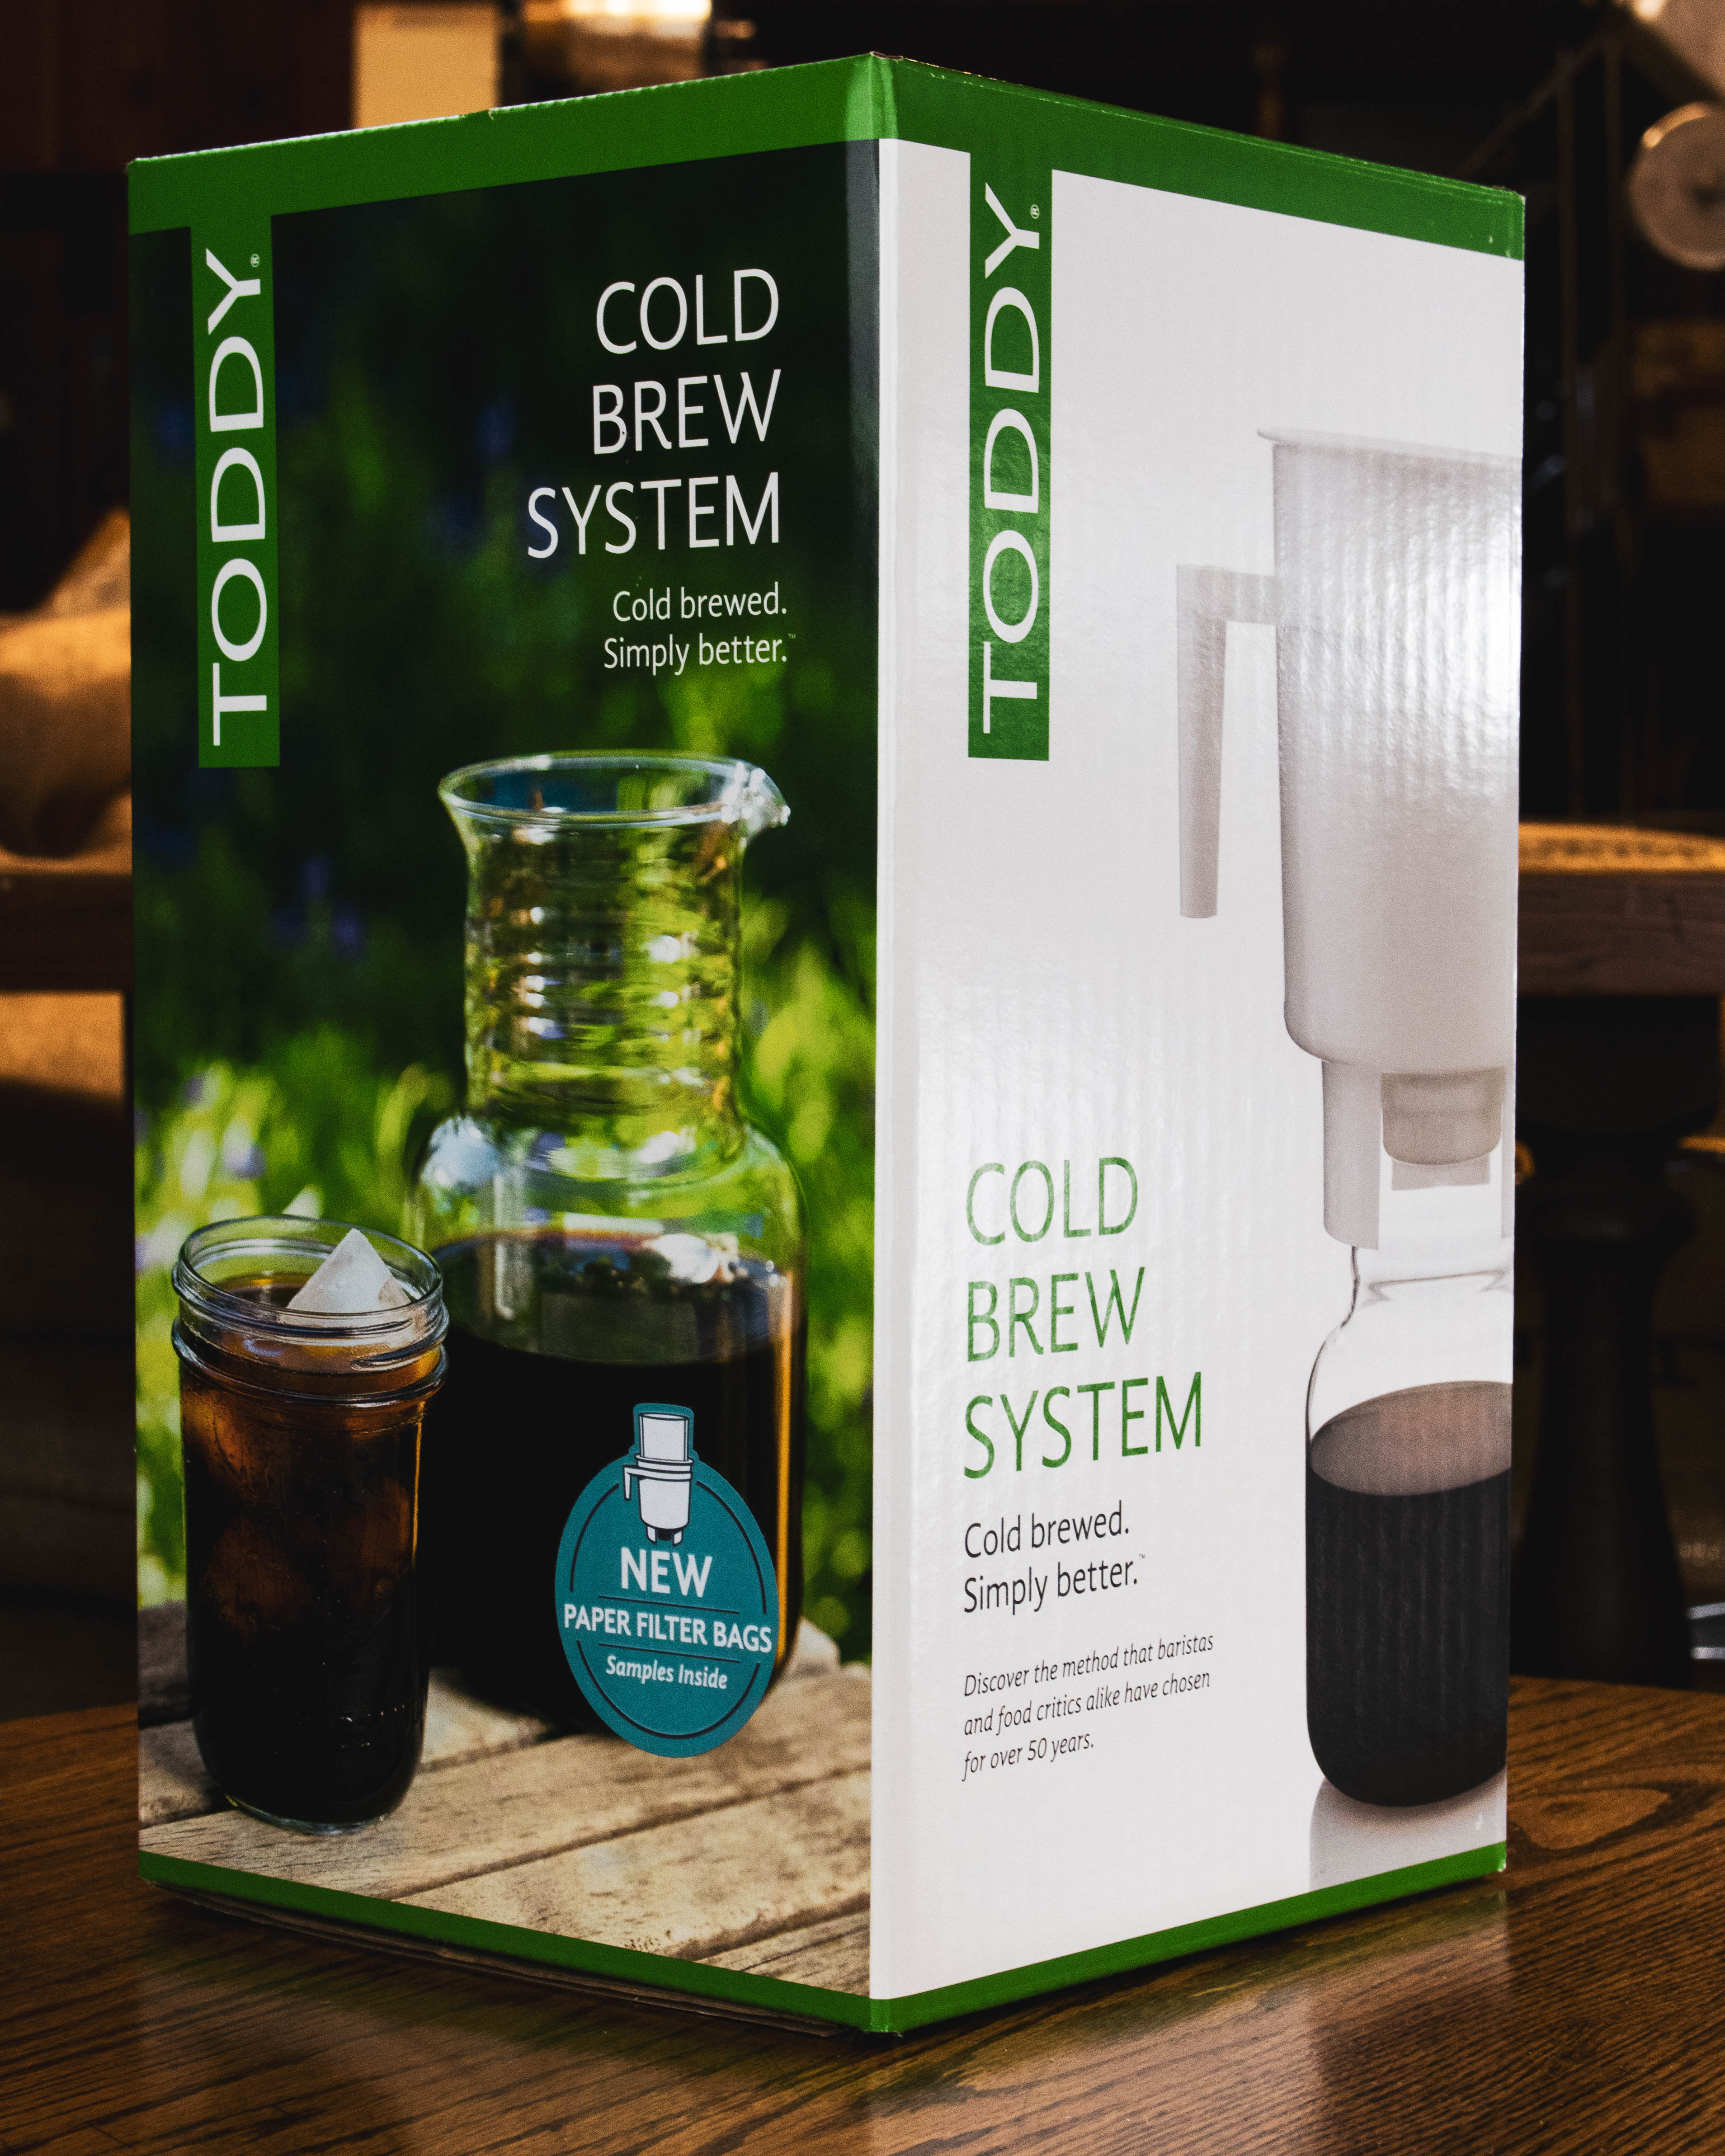 Explore Brewers  Toddy Cold Brew Coffee